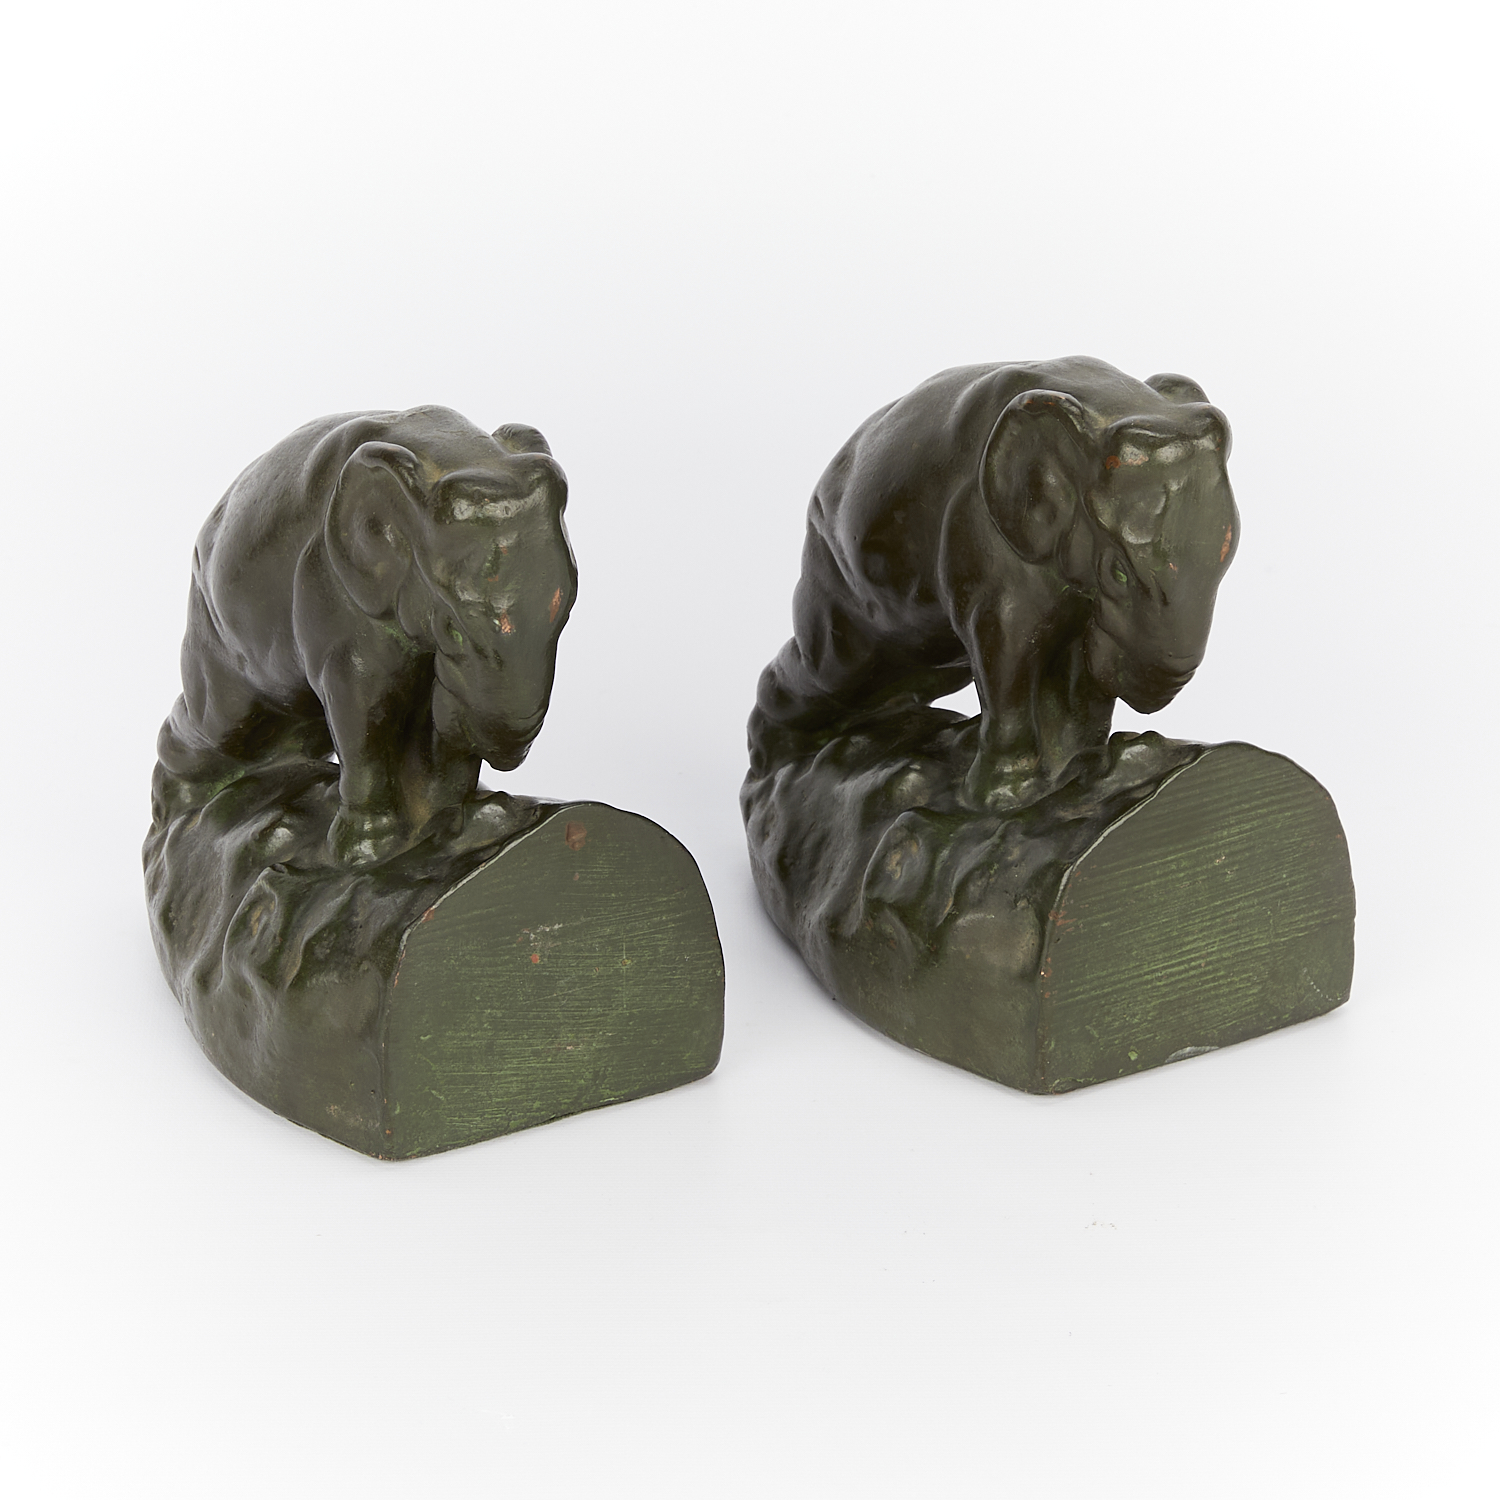 Pair of Bronze or Copper Elephant Bookends - Image 8 of 11